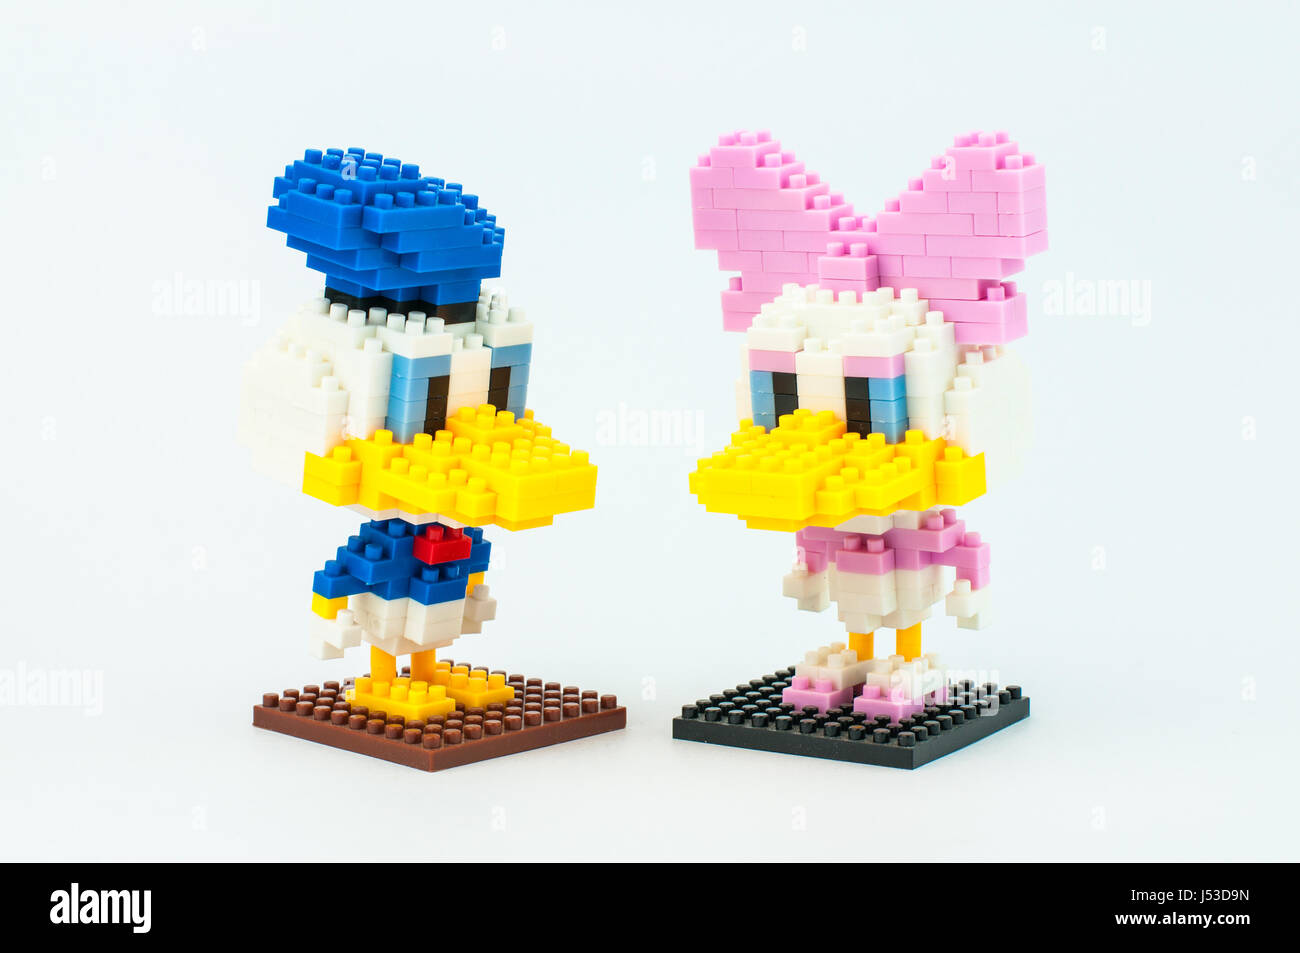 BANGKOK, THAILAND - MAY 12, 2017 :  DONALD DUCK and DAISY DUCK Micro Blocks in Isolated White Background Stock Photo